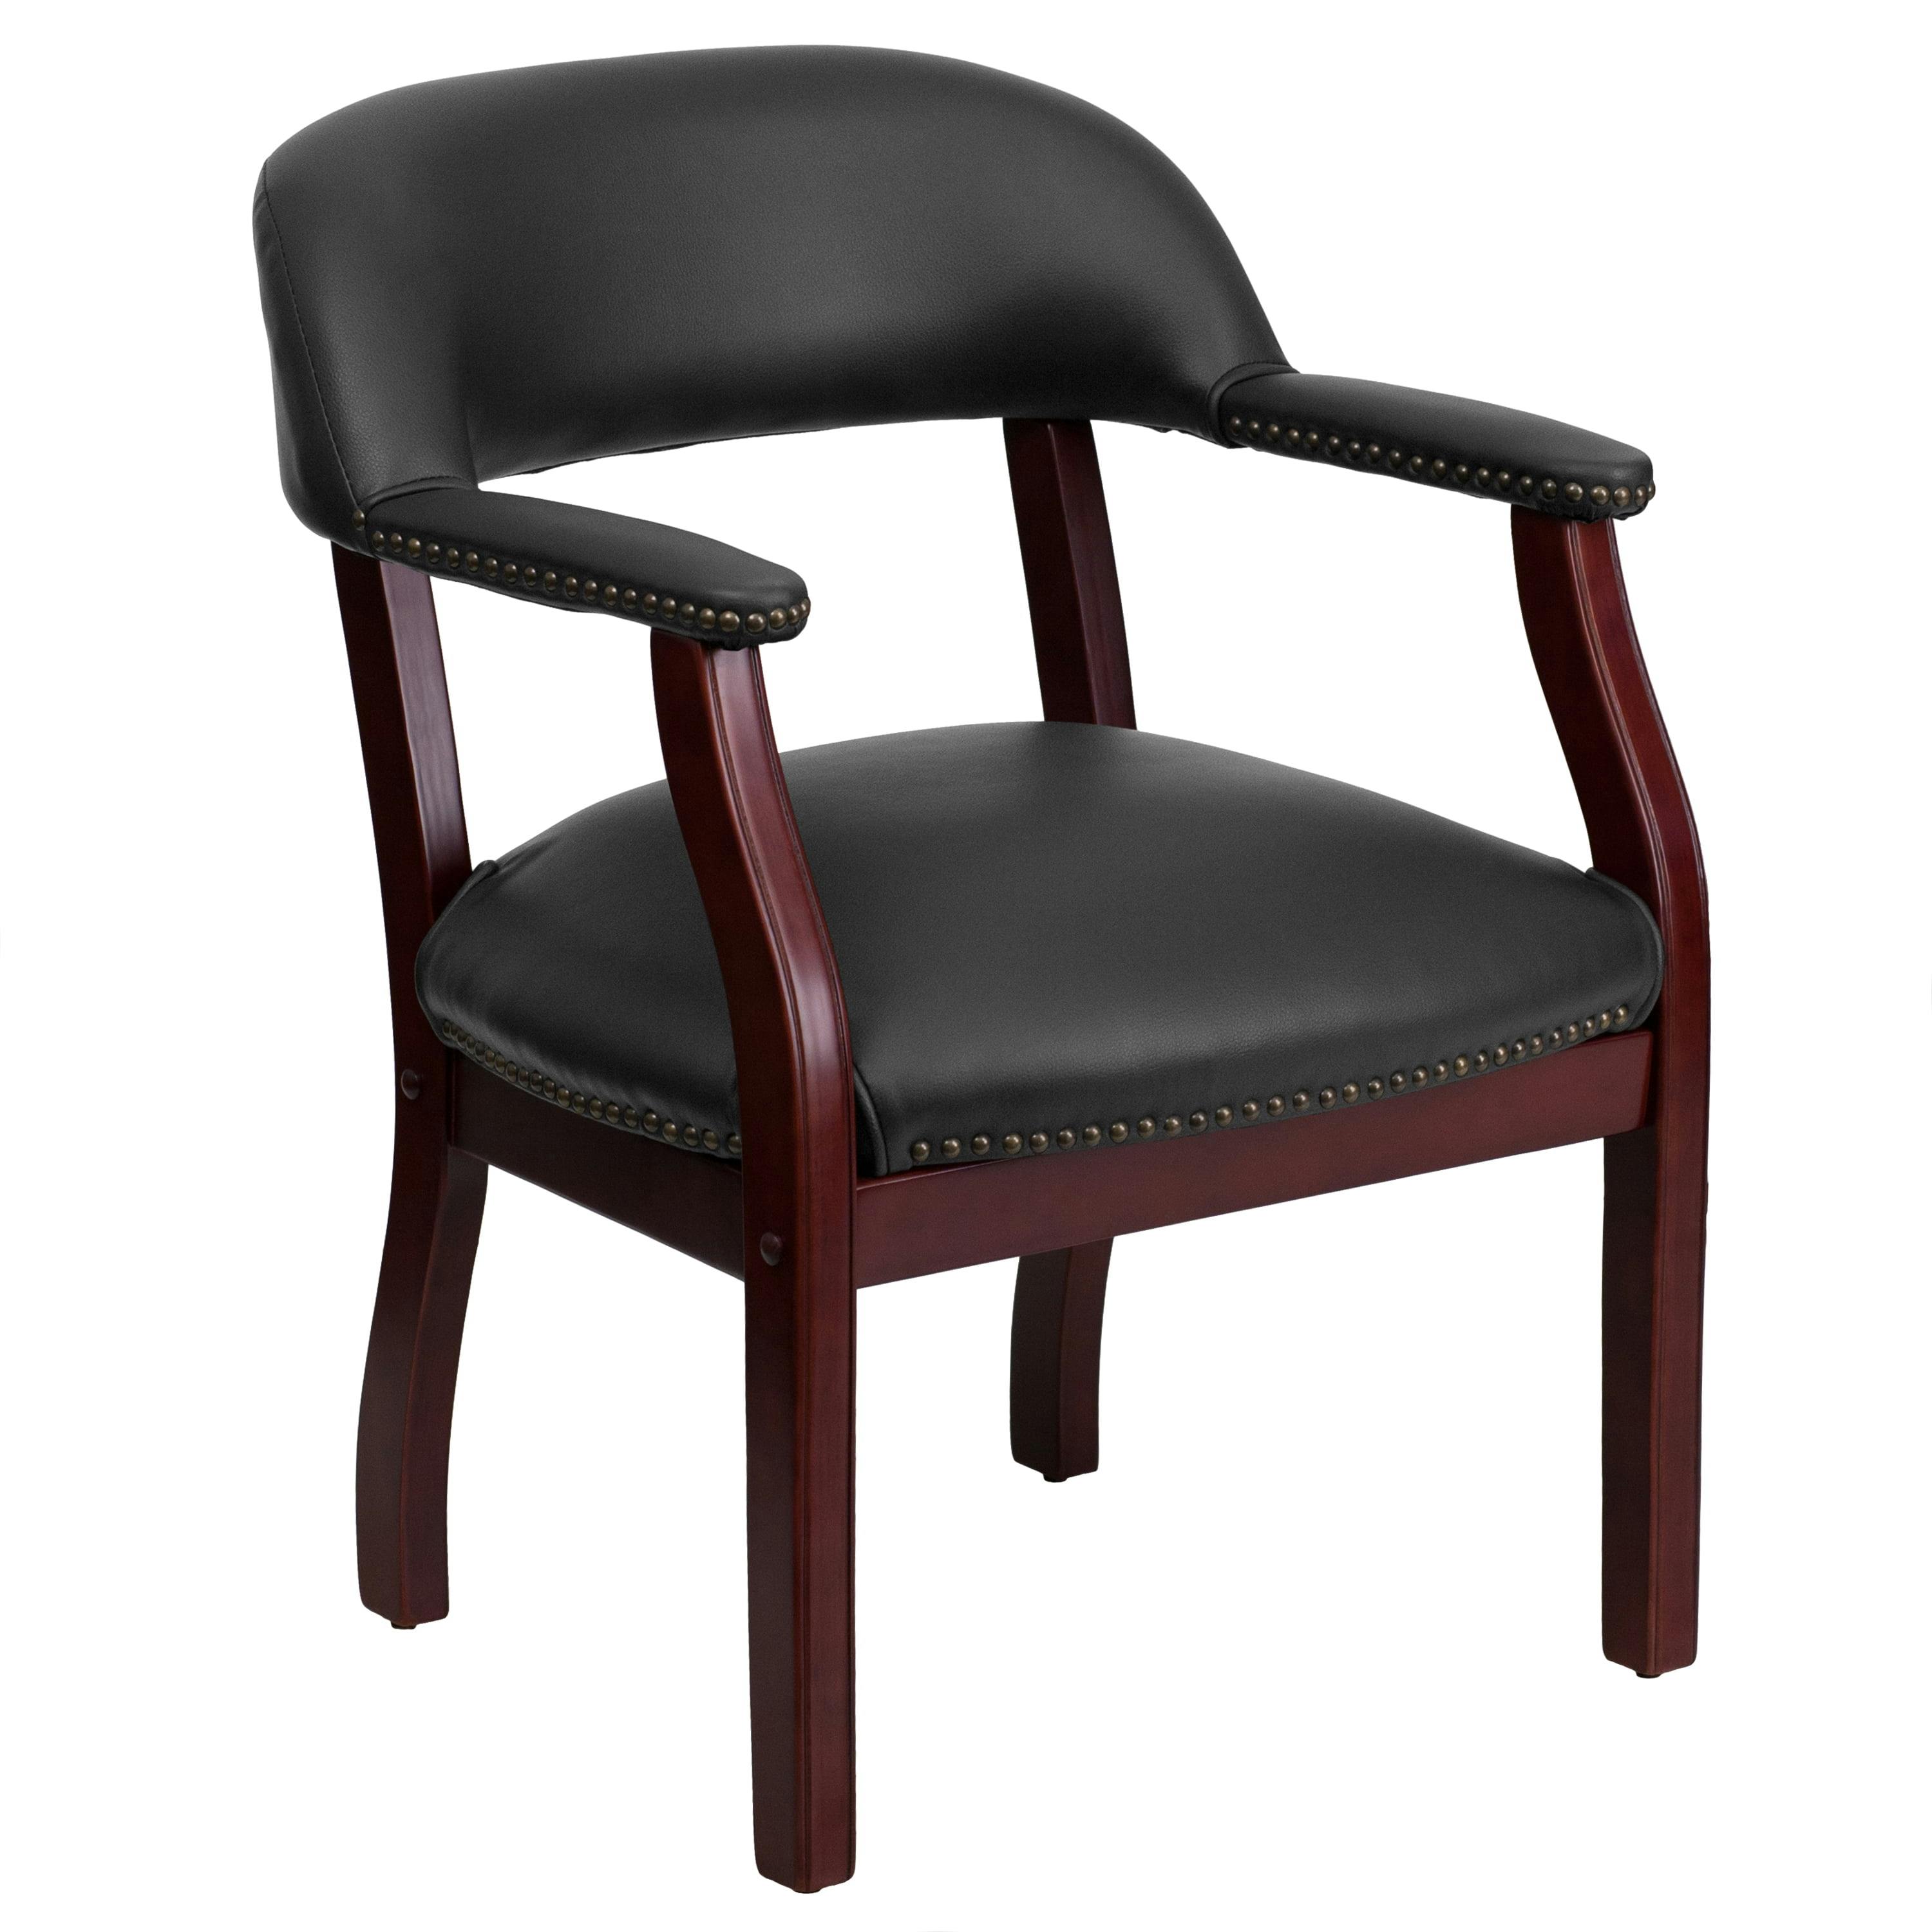 Elegant Black Vinyl and Wood Office Chair with Brass Nail Trim